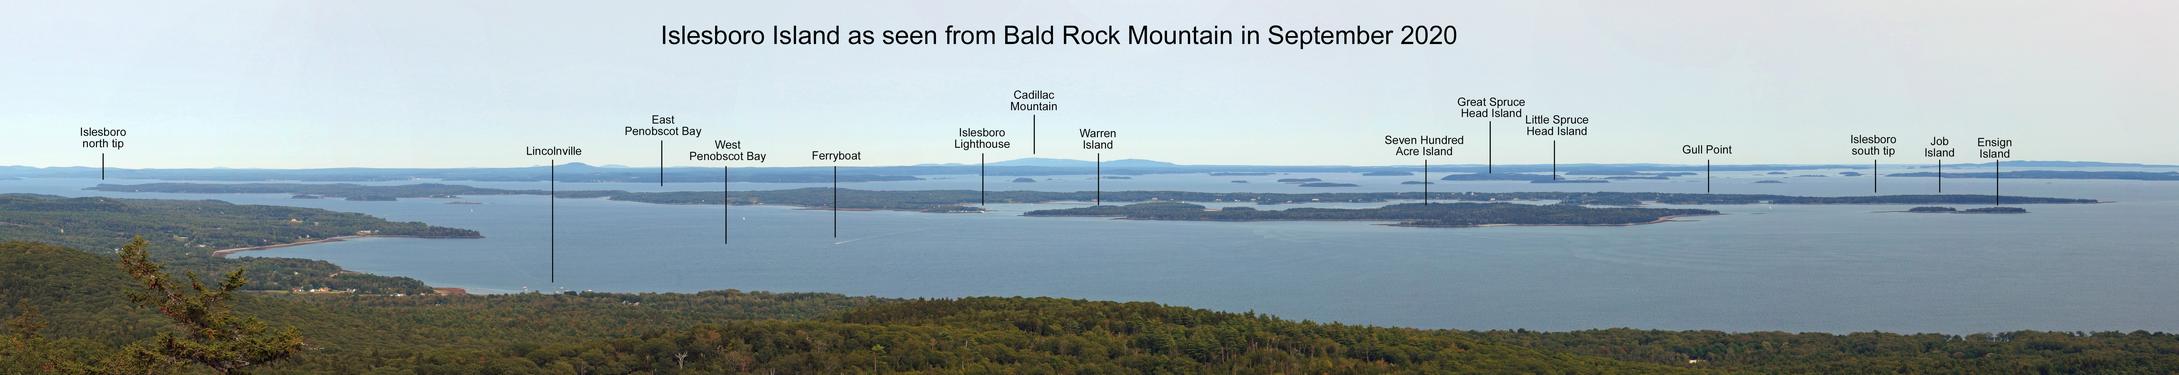 A view of Islesboro Island as seen from the summit of Bald Rock Mountain in ME on September 2020